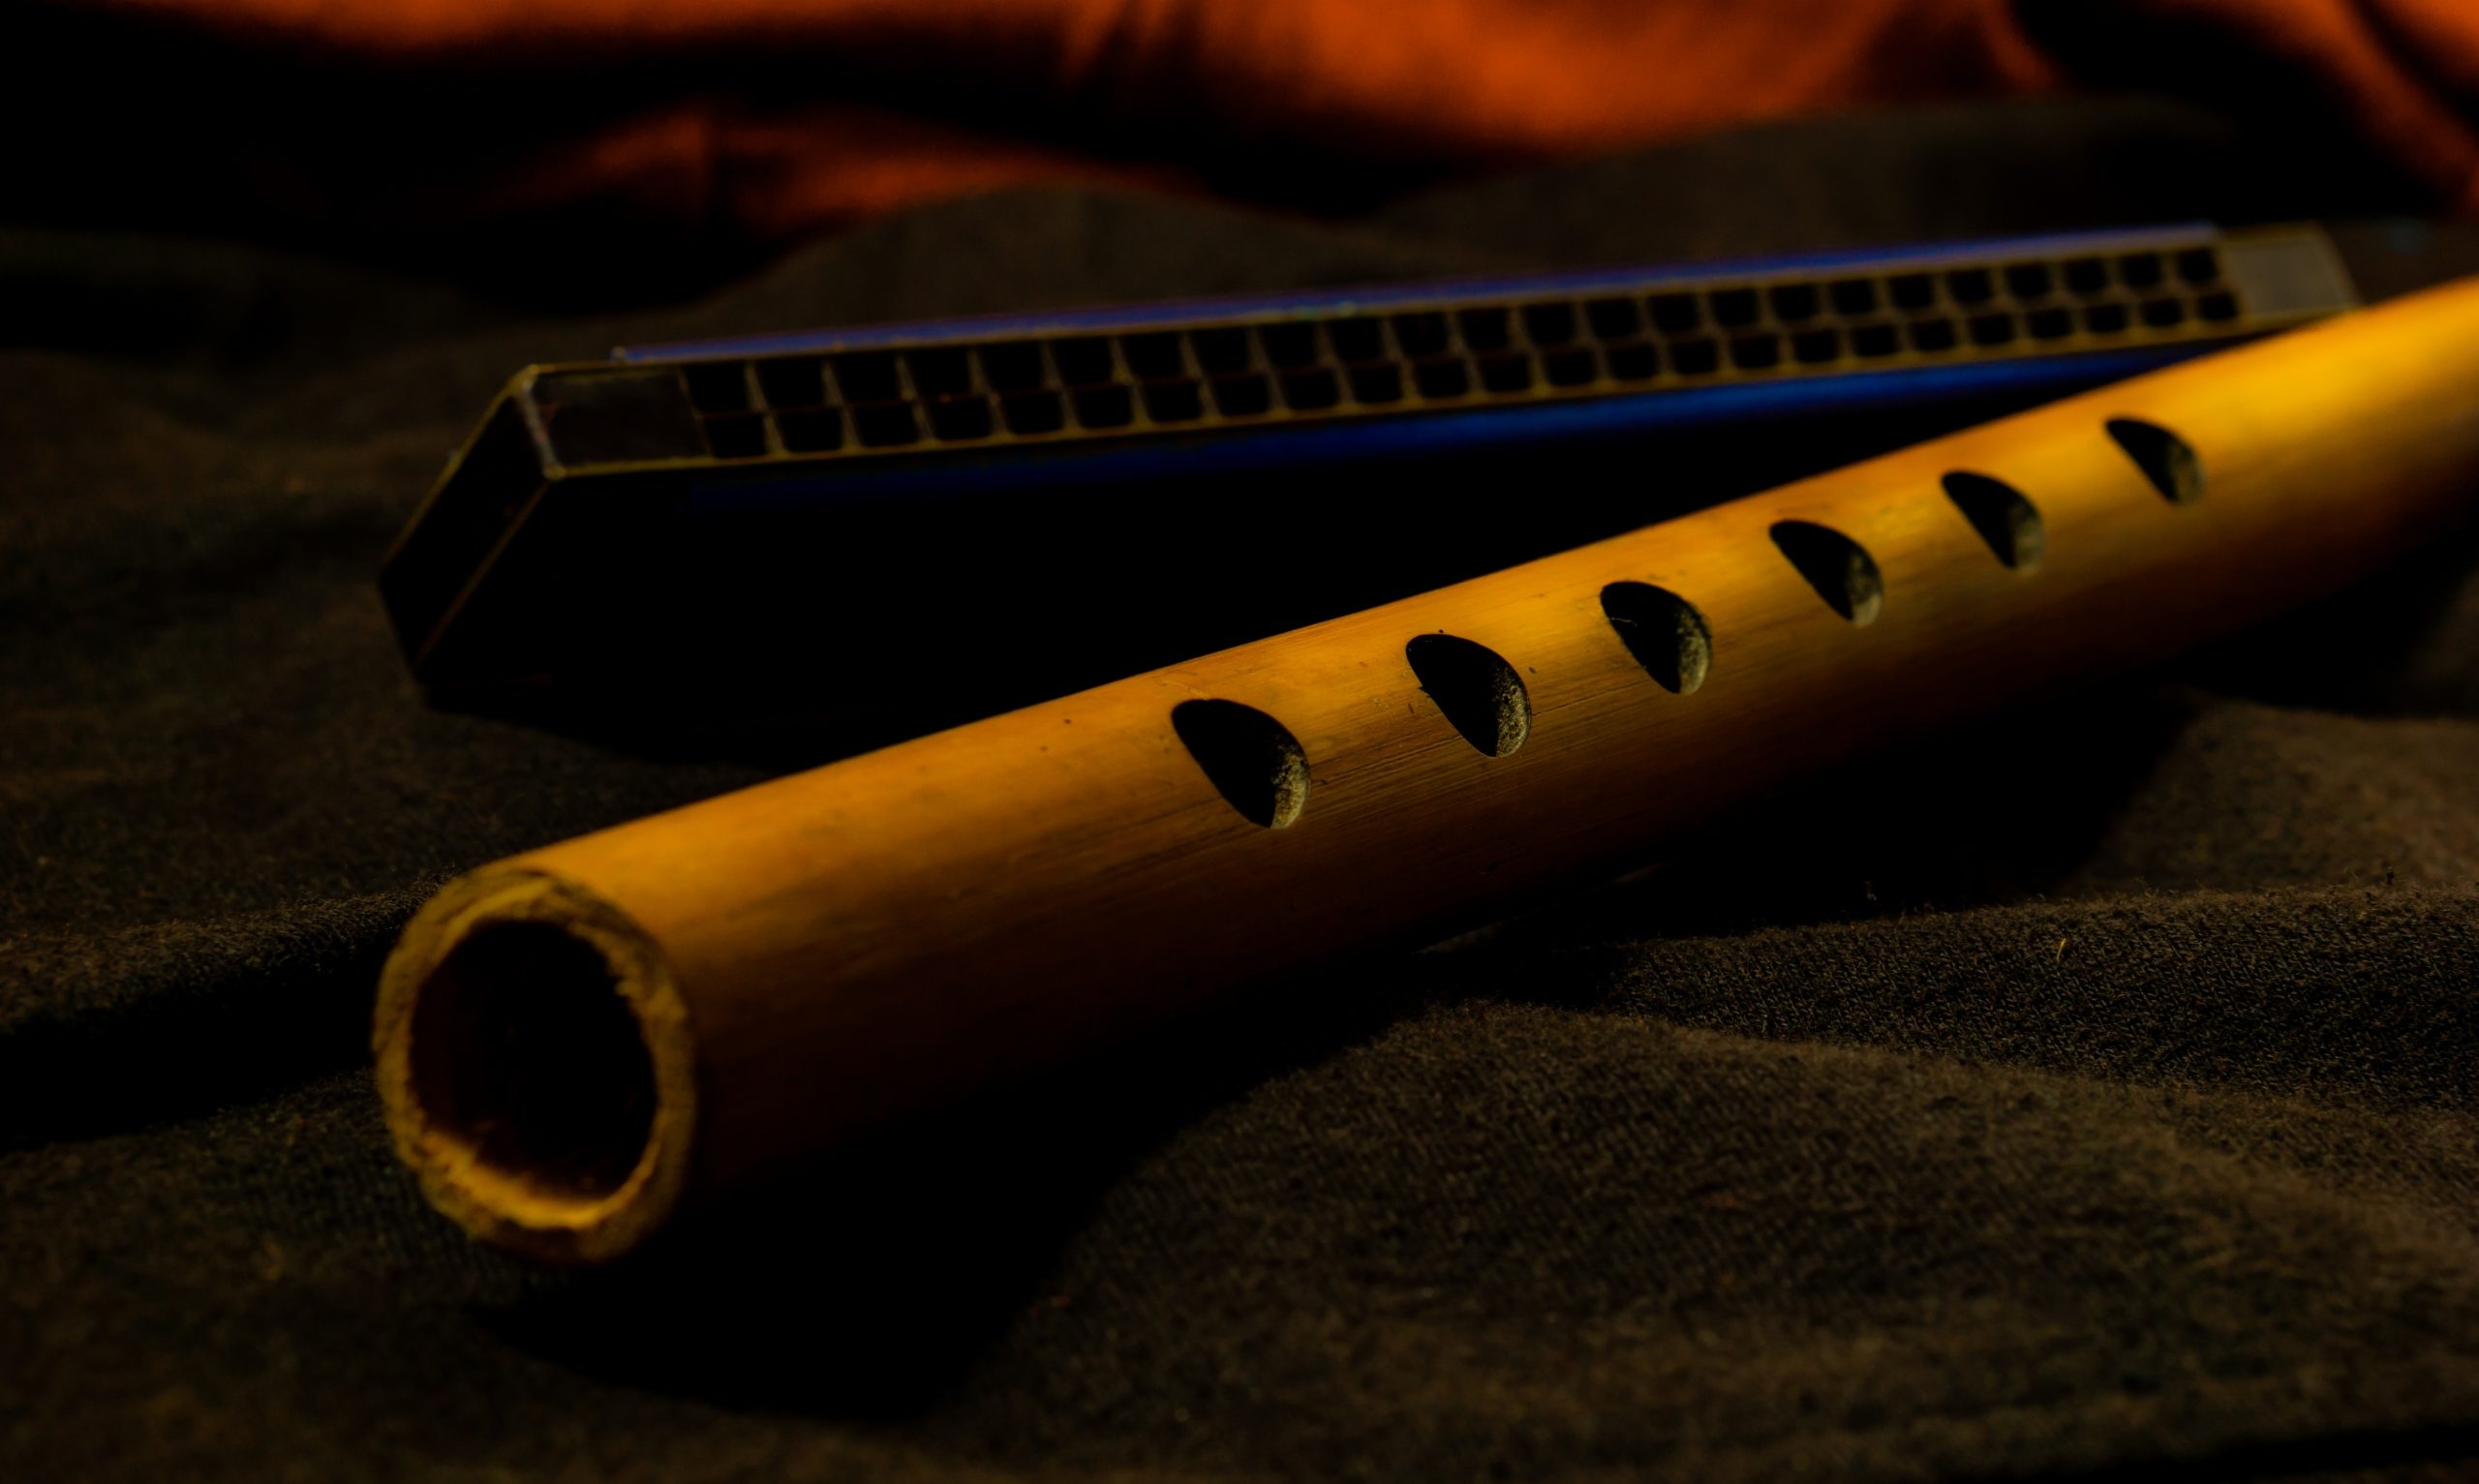 Harmonica: The Mouthpiece, The Air Chambers, Wooden Flute, Folk Musical Band. 2560x1540 HD Wallpaper.